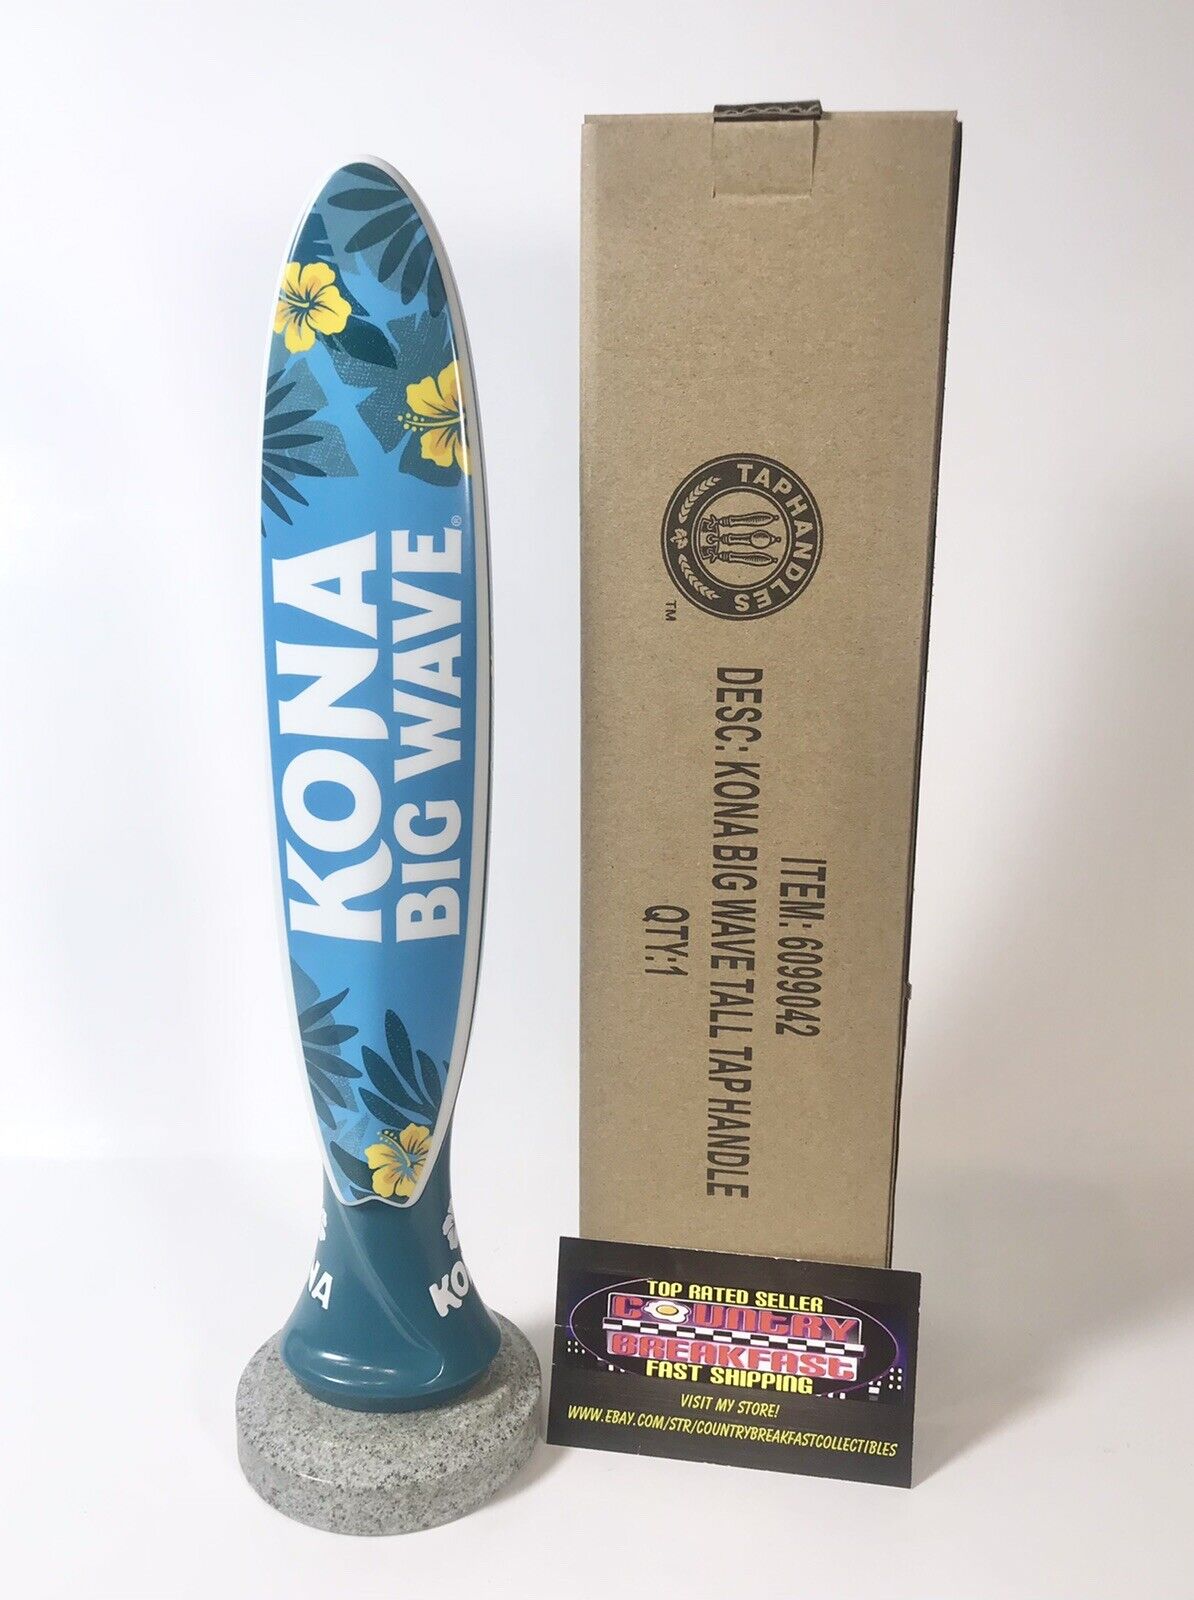 Kona Big Wave Golden Ale Surfboard Beer Tap Handle 11” Tall - Brand New In Box